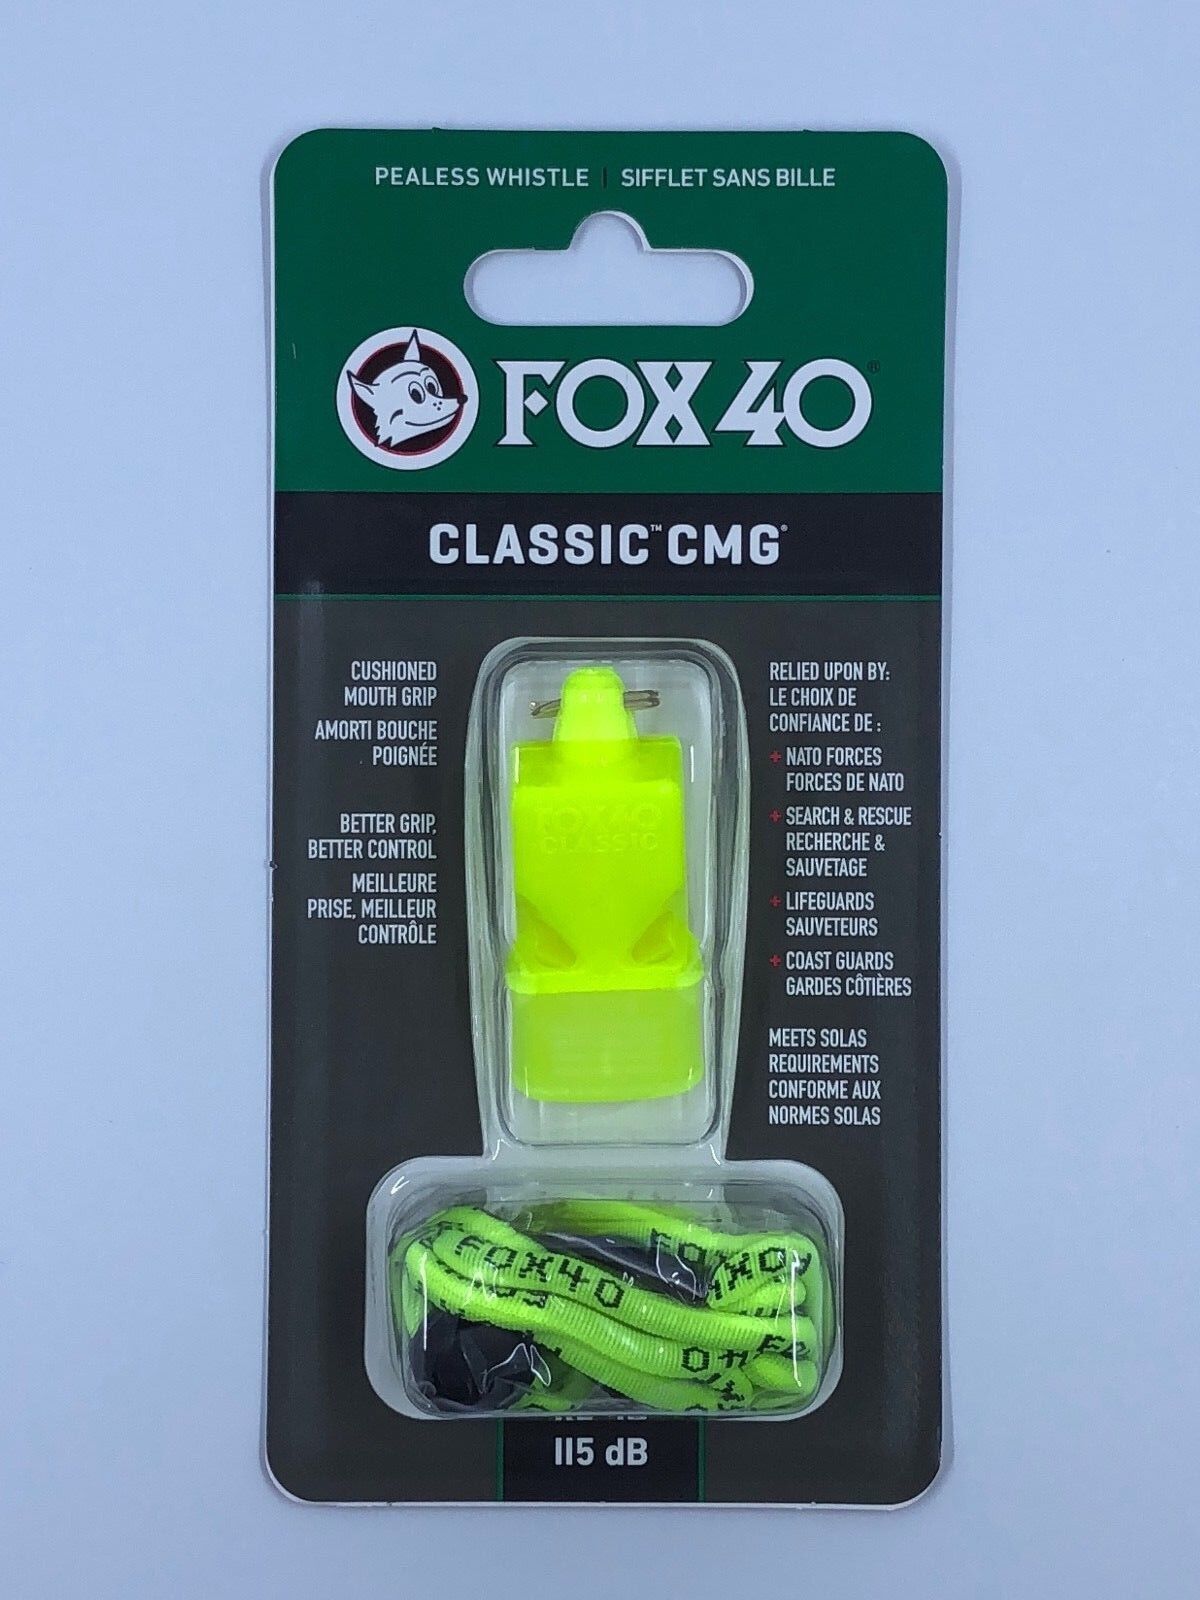 Neon Yellow Fox 40 Classic Cmg Whistle and 50 similar items